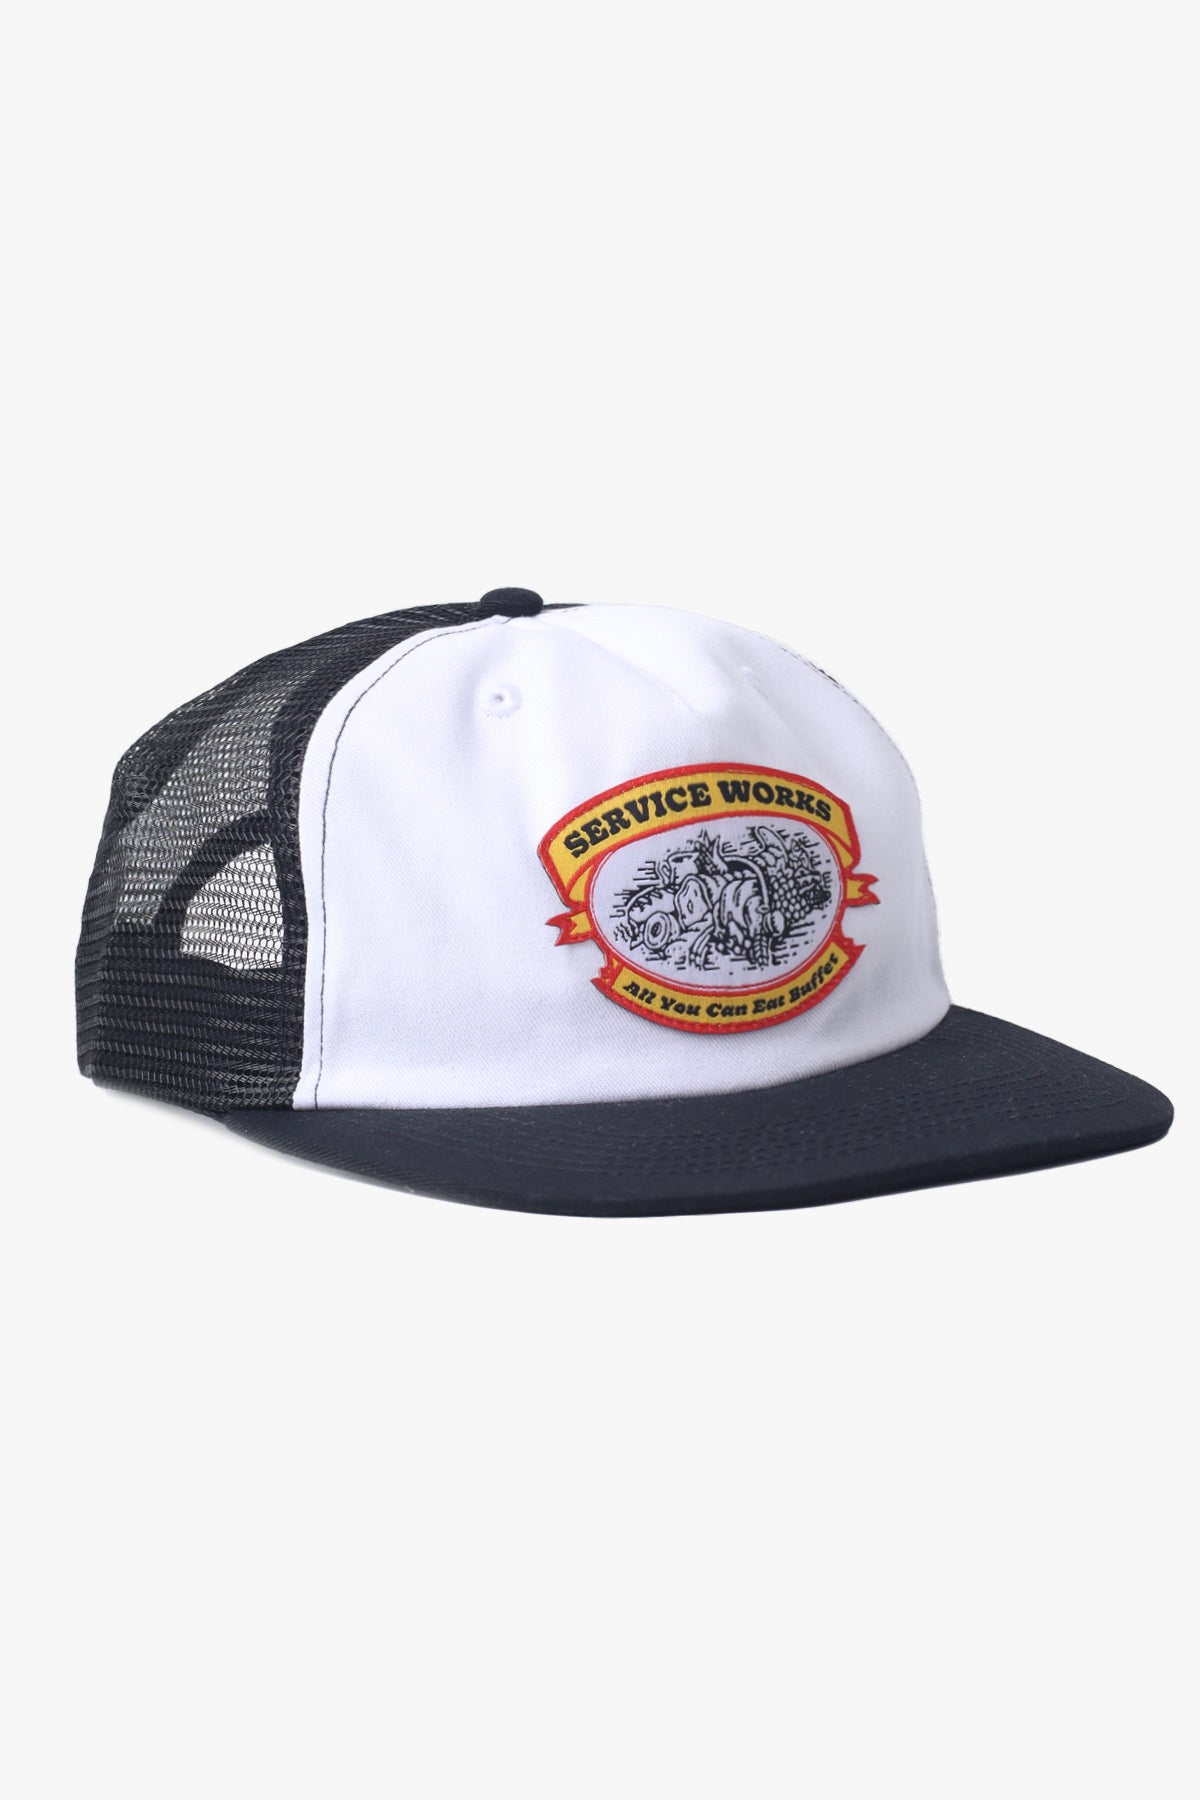 Service Works All You Can Eat Trucker Hat